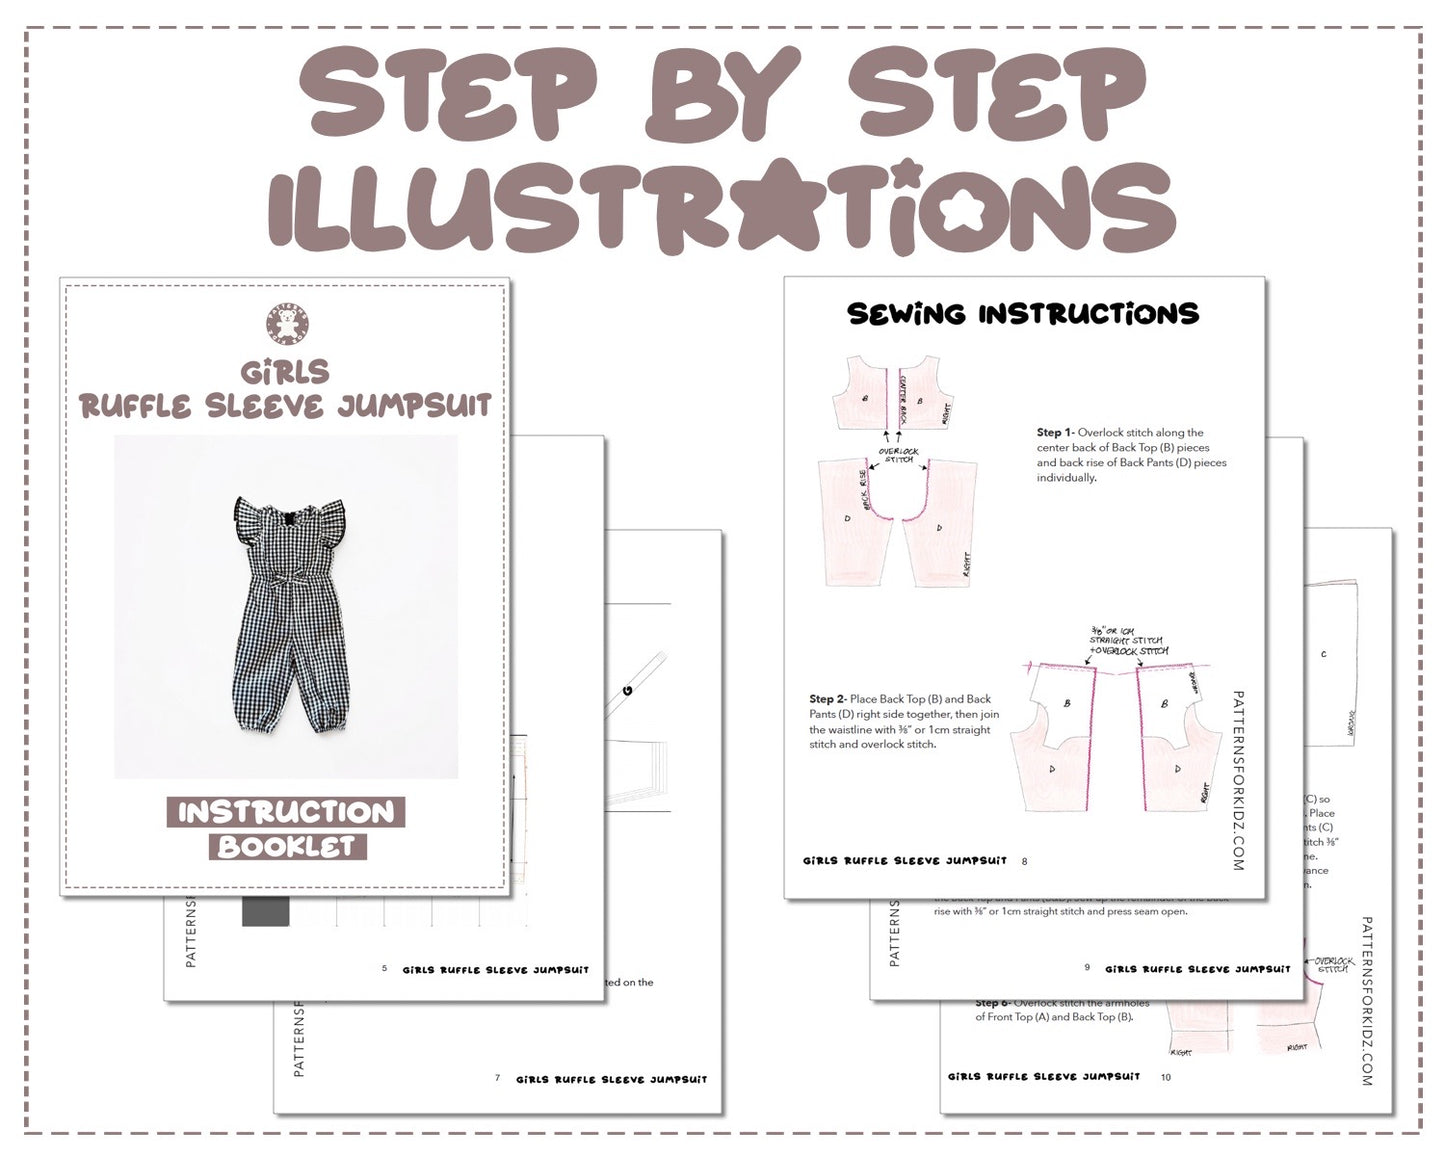 Girls Ruffle Sleeve Jumpsuit sewing pattern step by step illustrations.